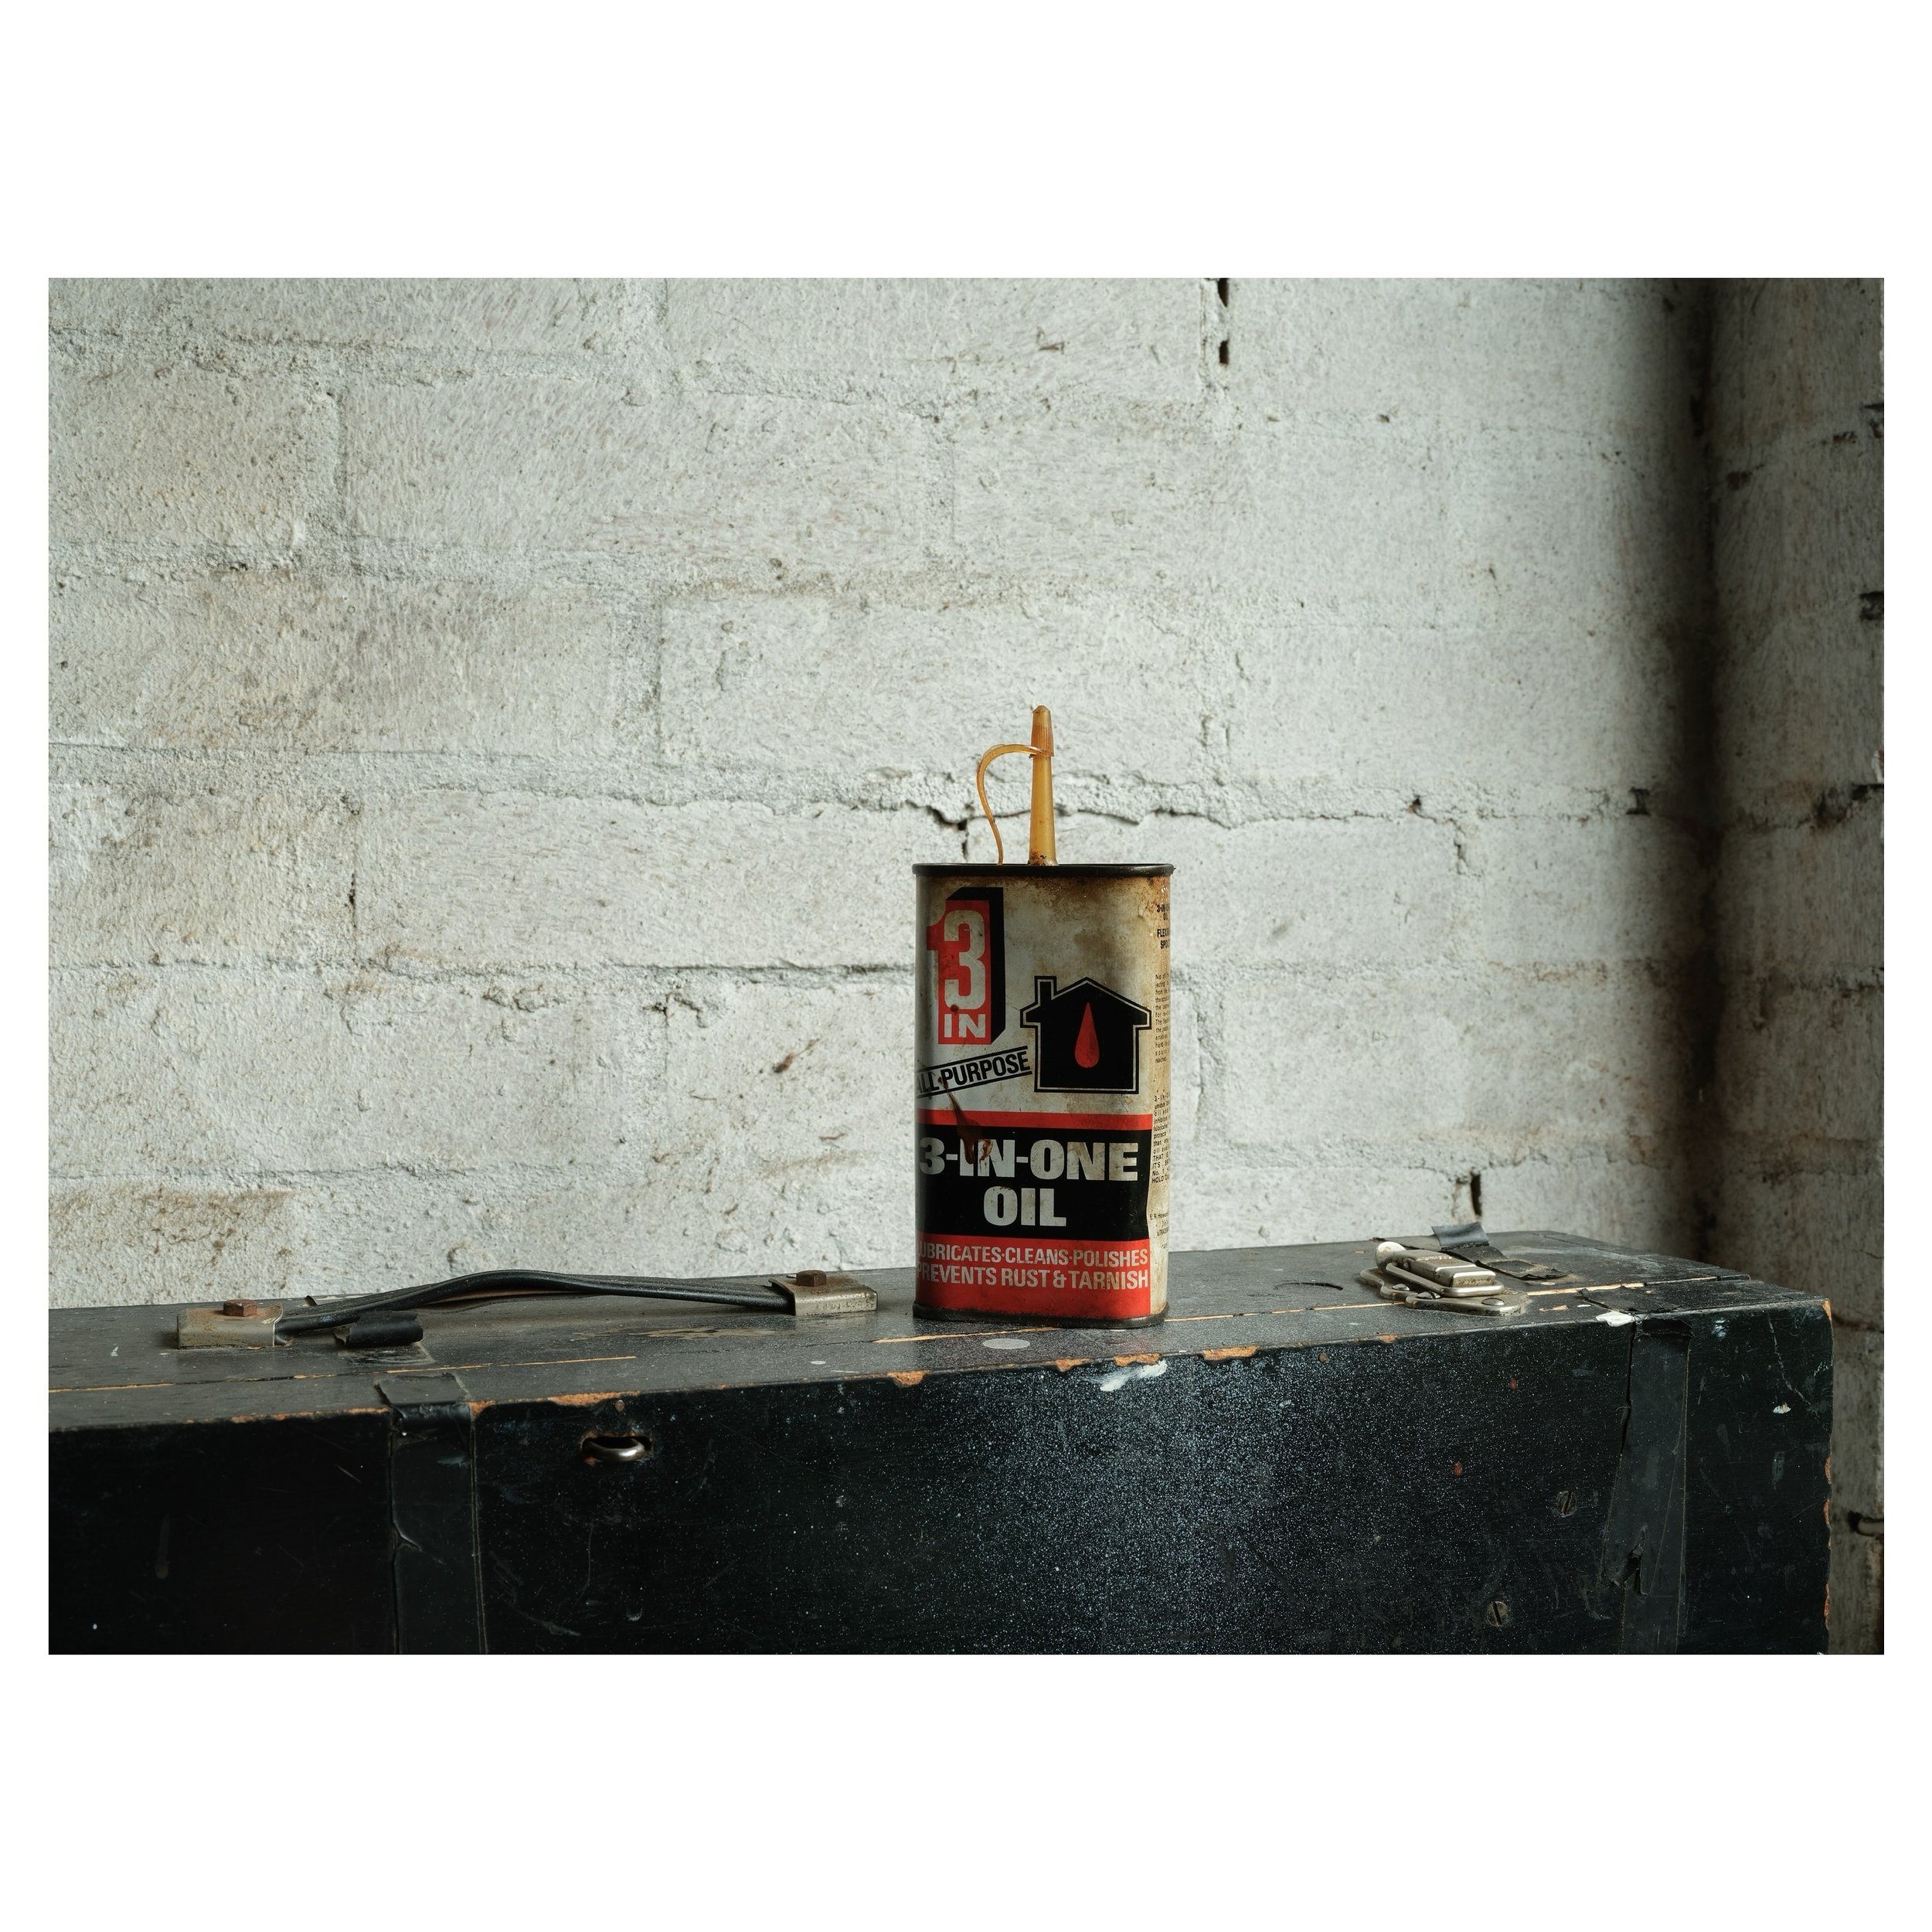 3IN1 oil, this can has been in our family garage for as long as I can remember and it is still around 1/3 full.
.
.
.
.
.
#3in1oil #oilcan #lubricant #protect #garage #preston #penwortham #fujifilmgfx100s #dadsgarage